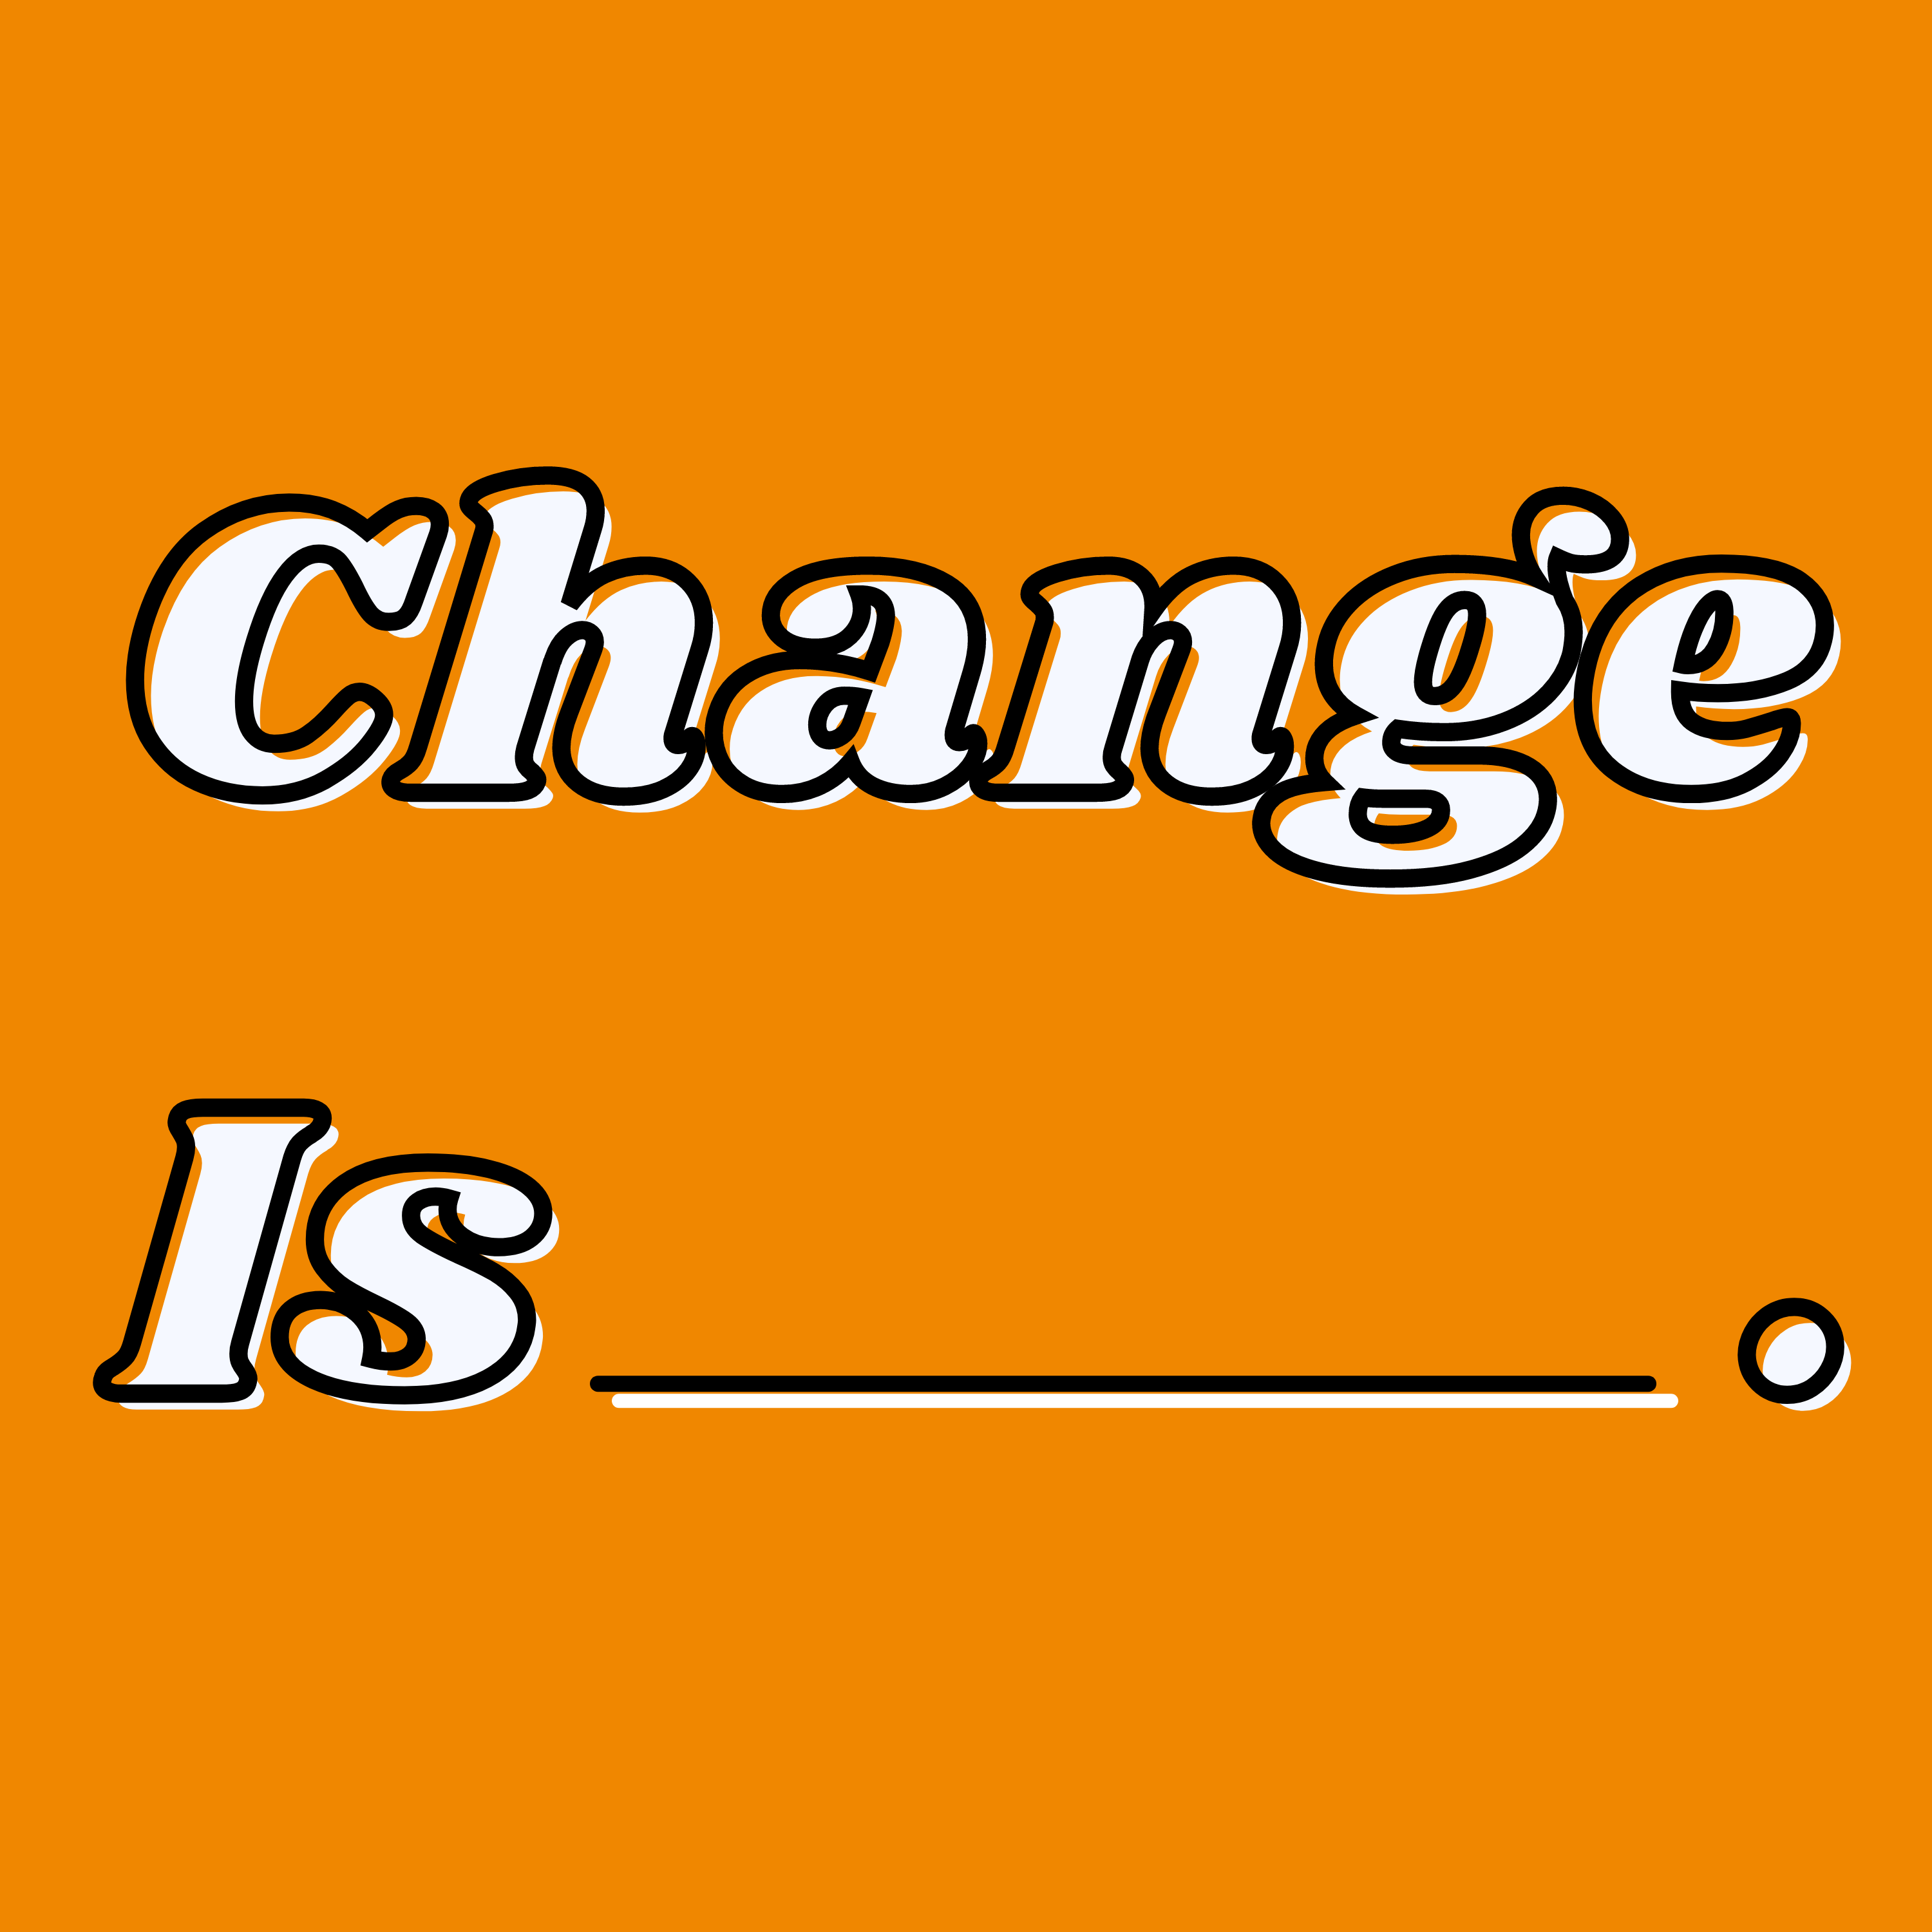 Change Is